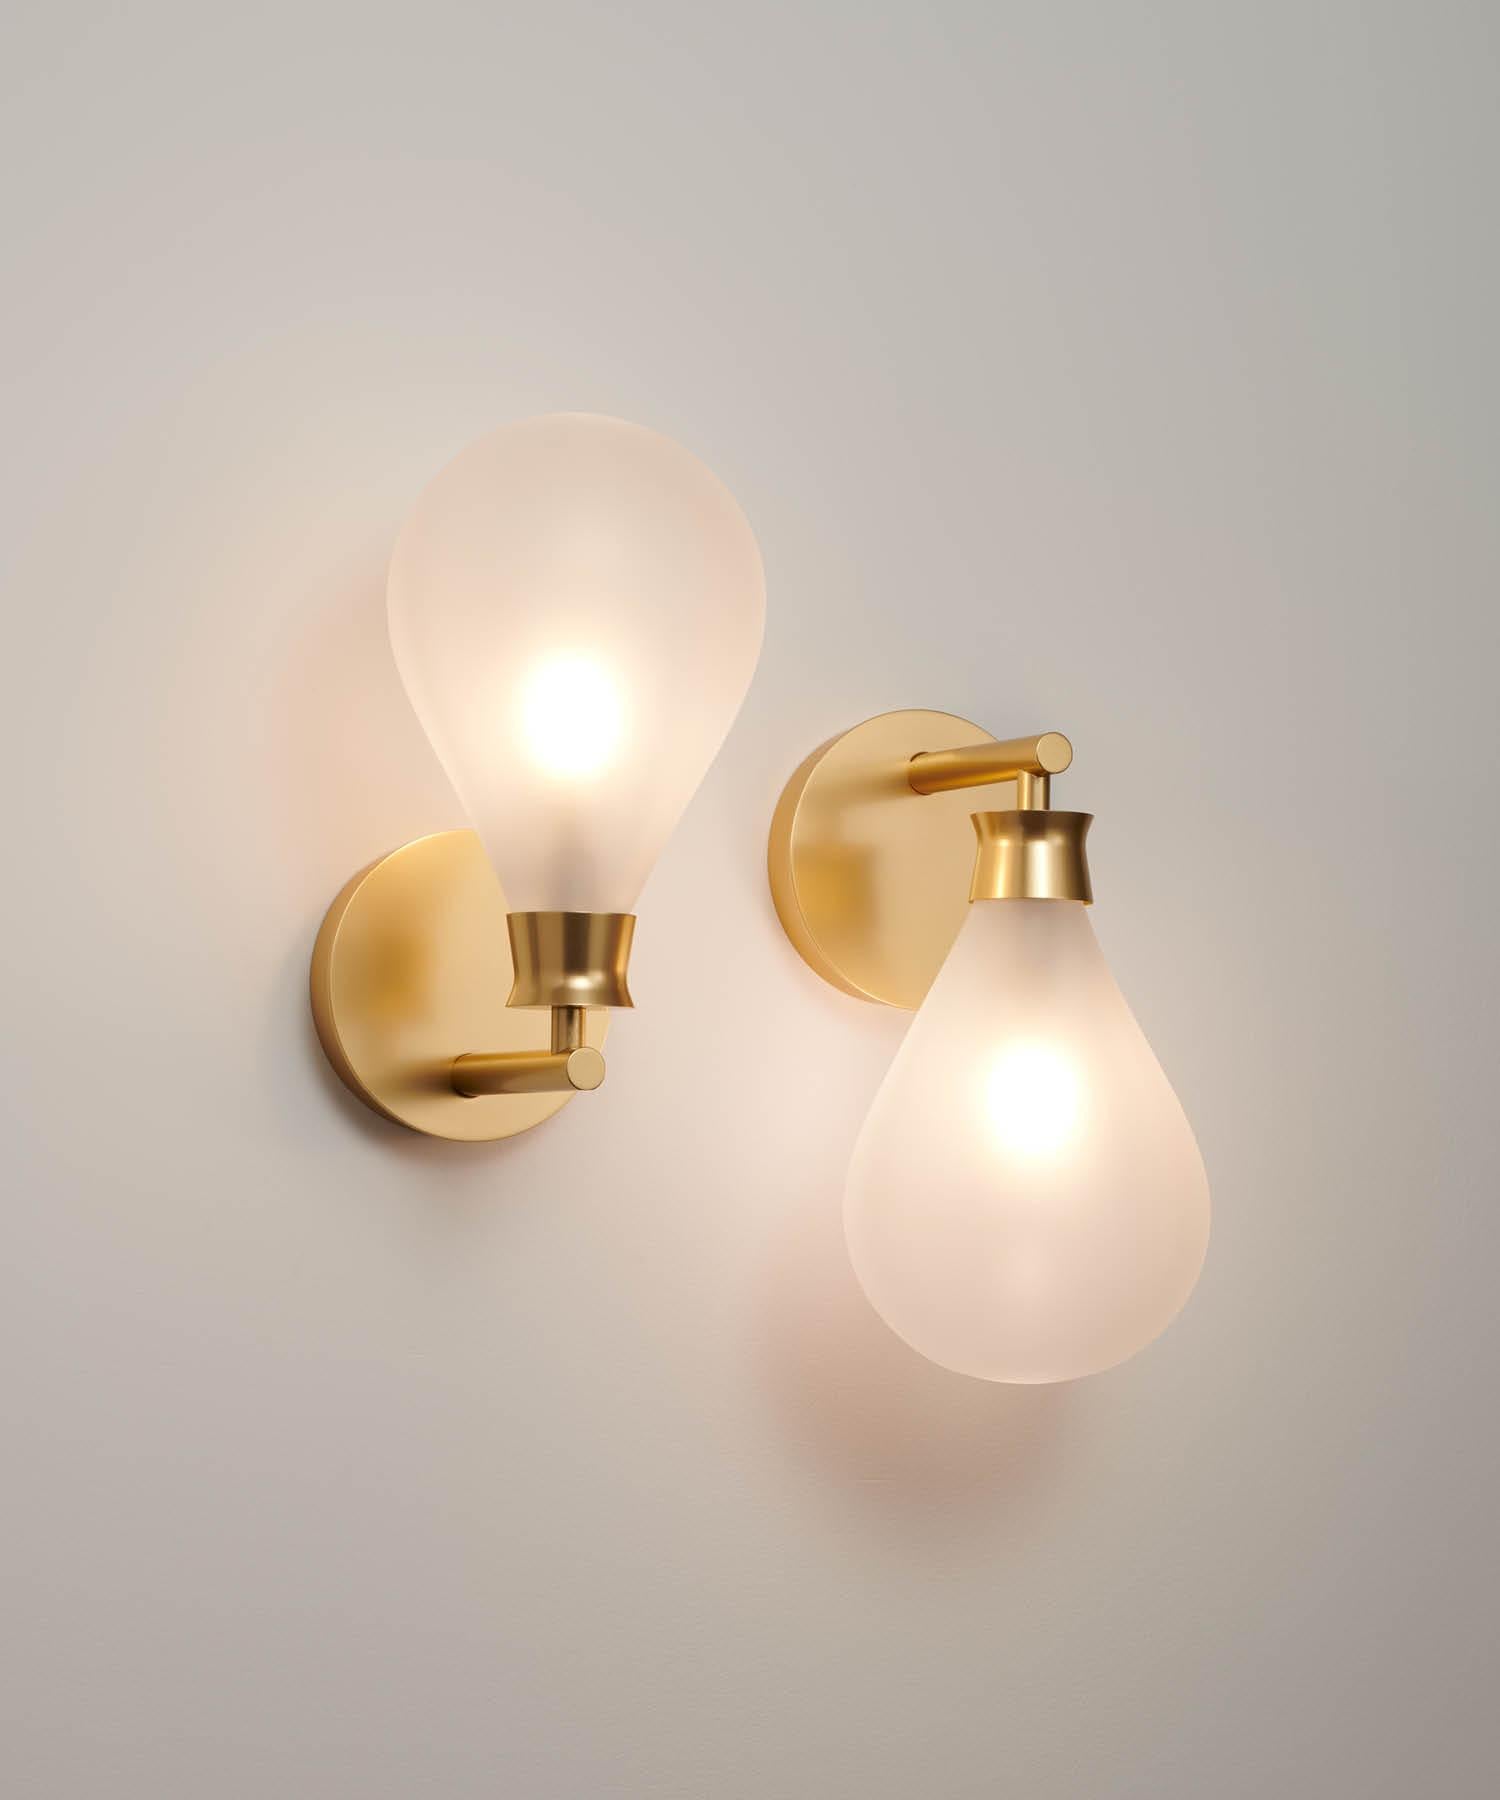 Contemporary Cintola Wall Light in Polished Aluminium with Bronze Handblown Glass Globe For Sale